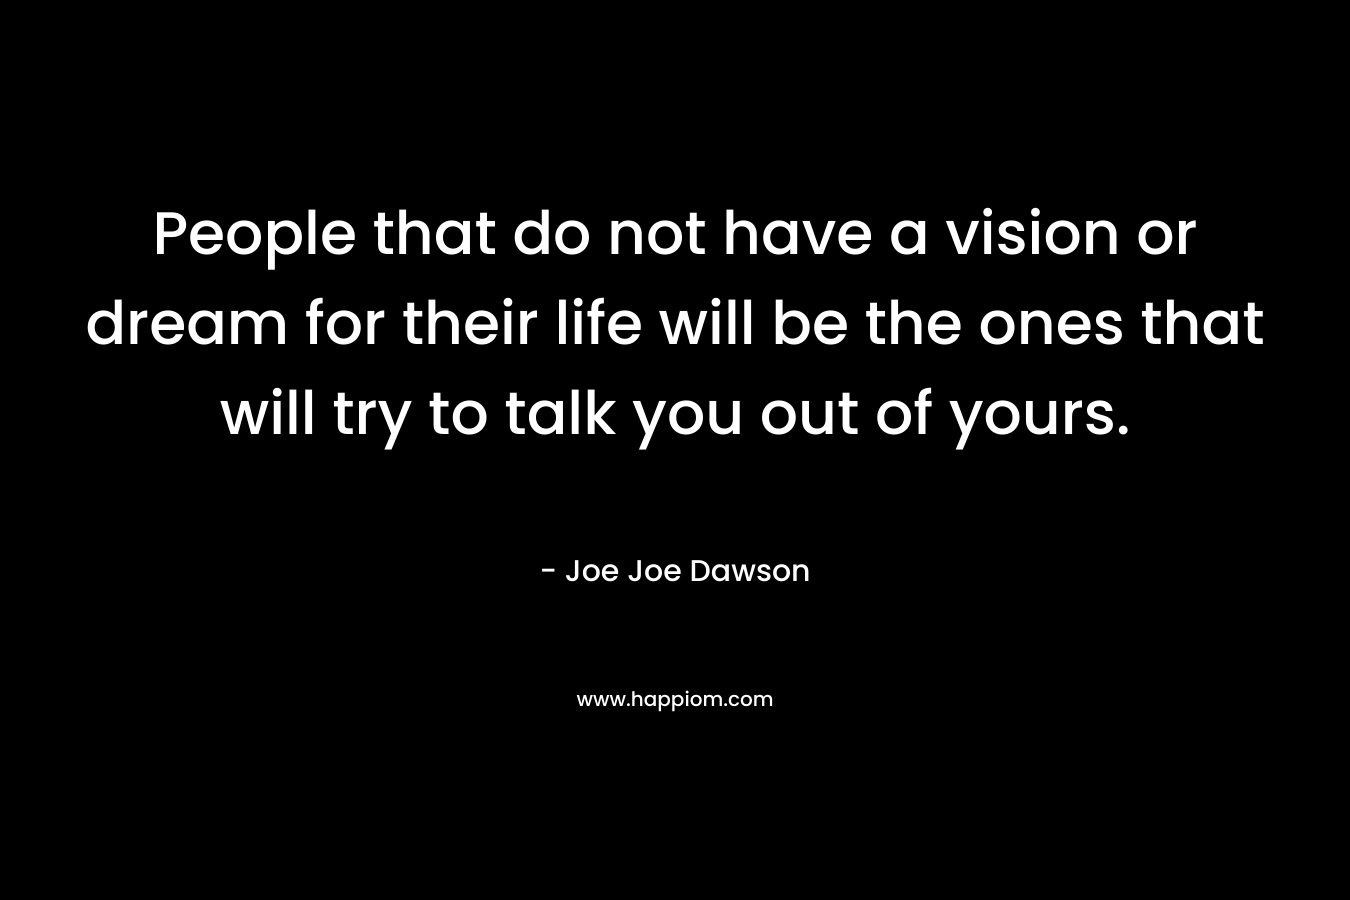 People that do not have a vision or dream for their life will be the ones that will try to talk you out of yours.